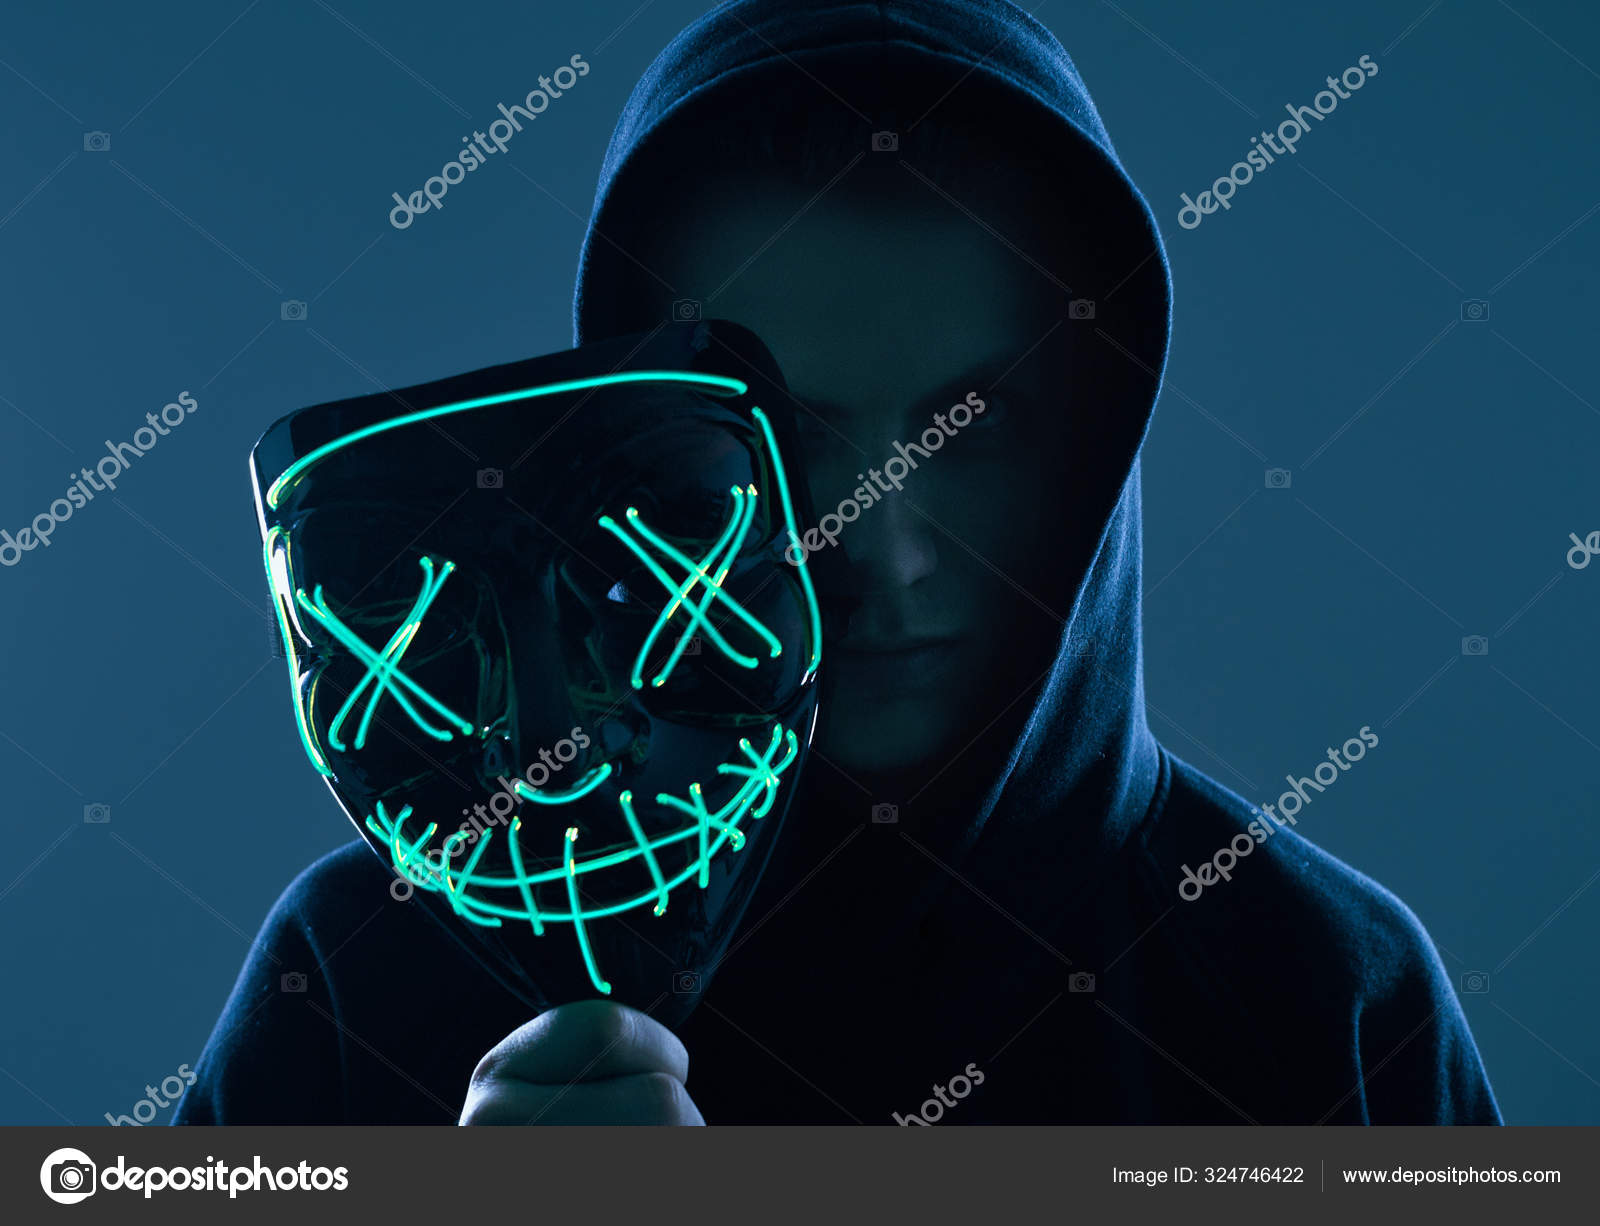 Anonymous man in black hiding face behind a mask Stock Photo by 324746422